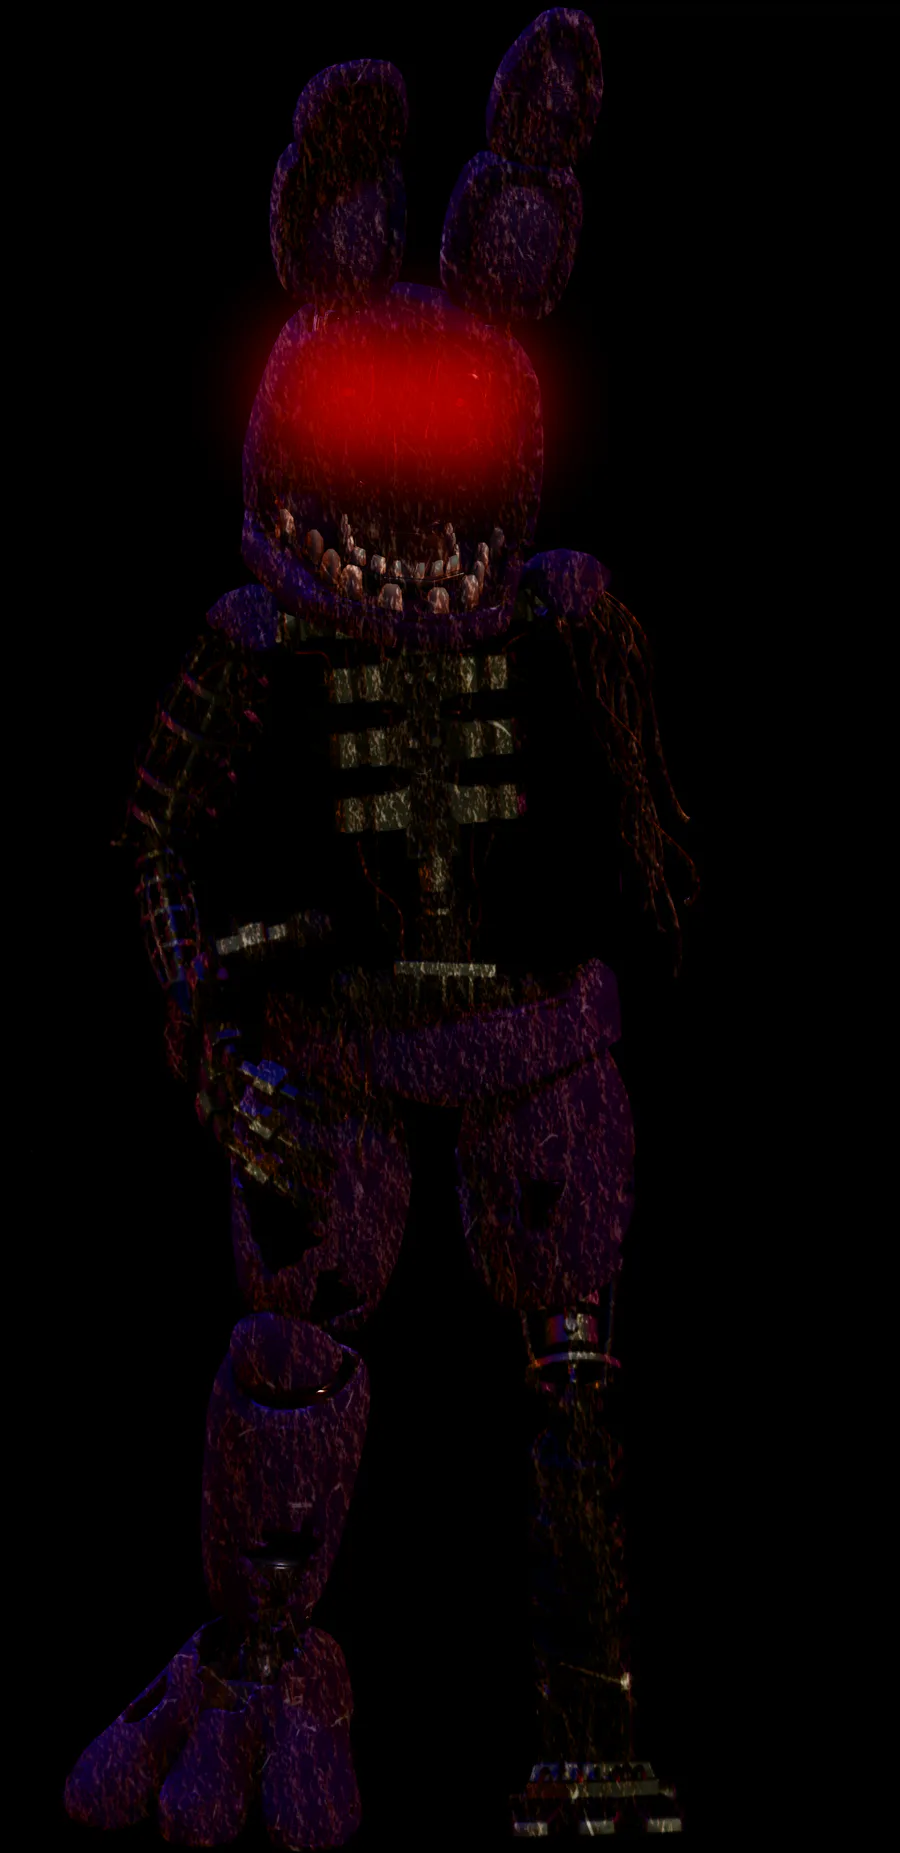 mijo_crap on Game Jolt: Fixed Nightmare Chica